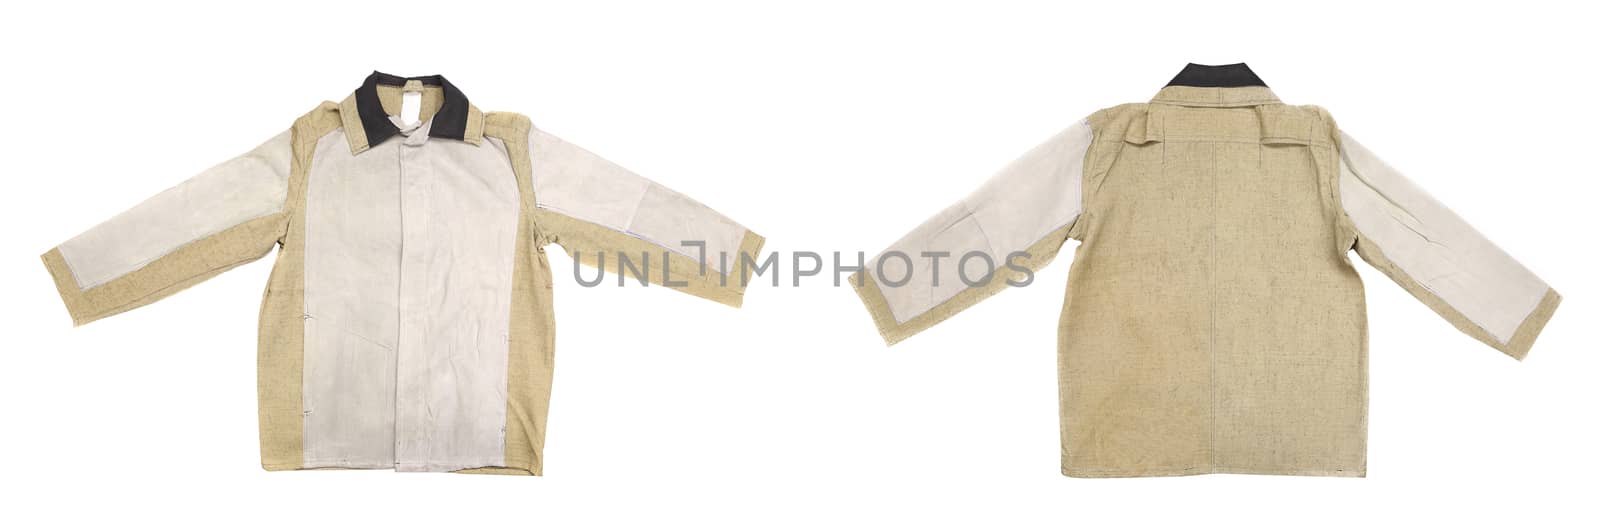 Welding working jacket. Isolated on a white background.